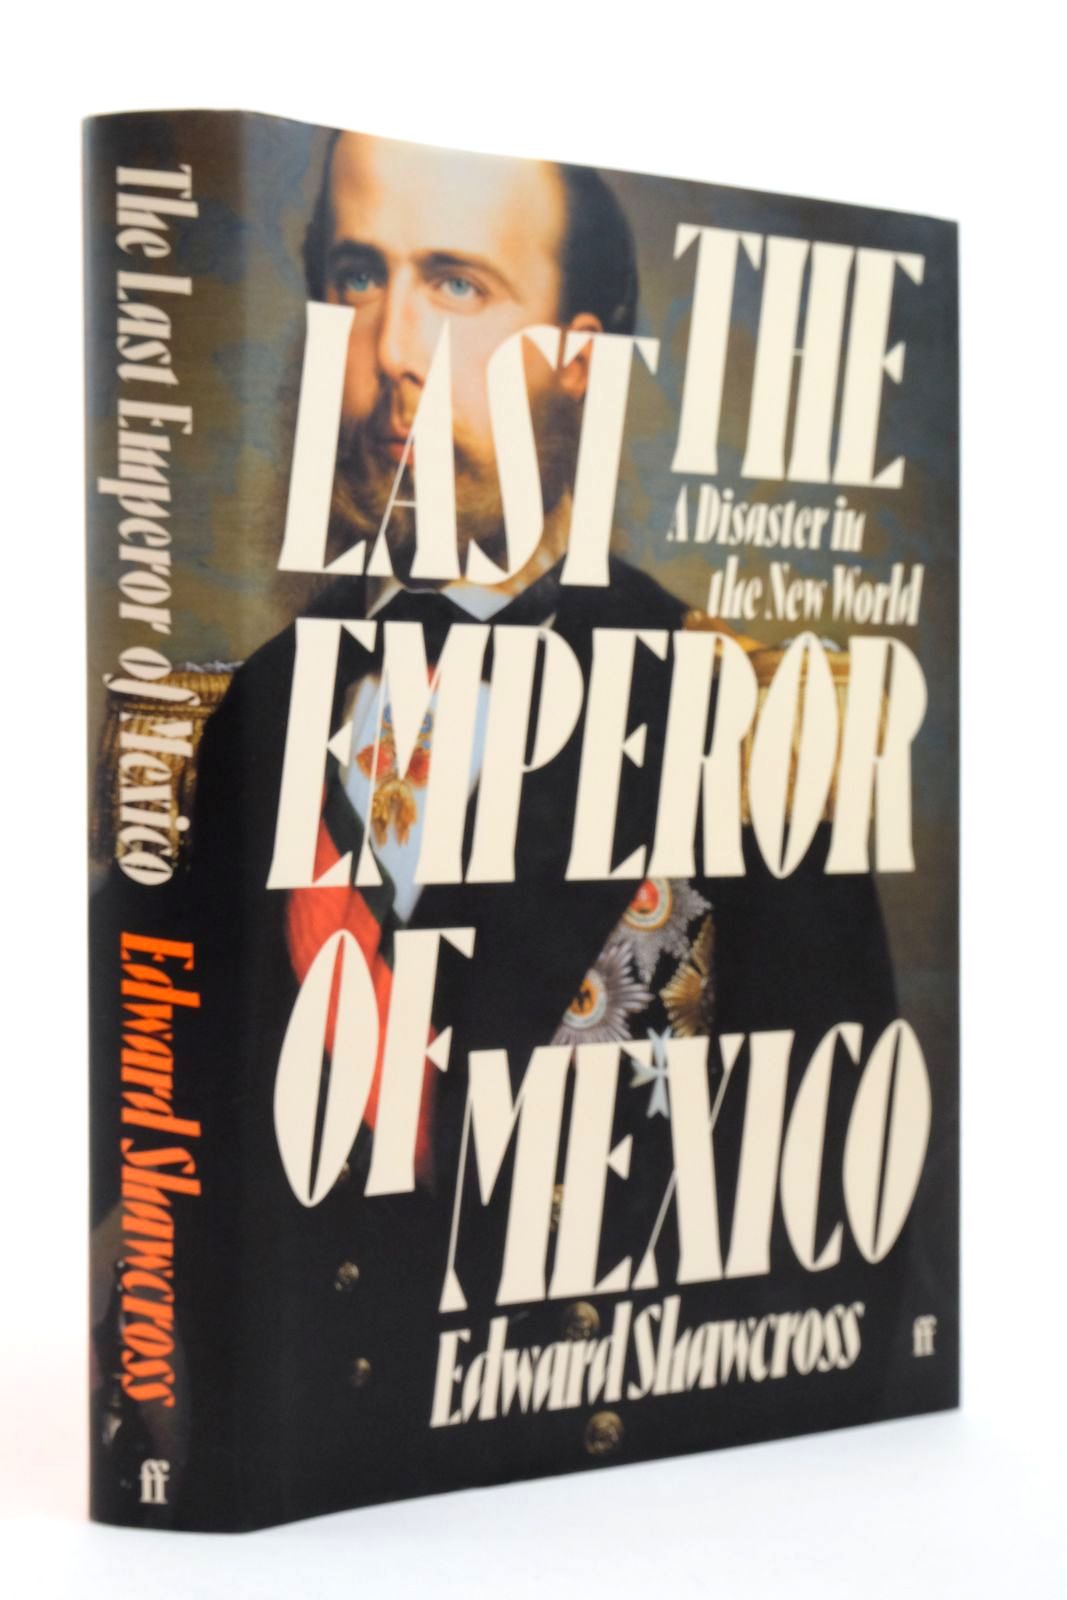 Photo of THE LAST EMPEROR OF MEXICO: A DISASTER IN THE NEW WORLD- Stock Number: 2138832